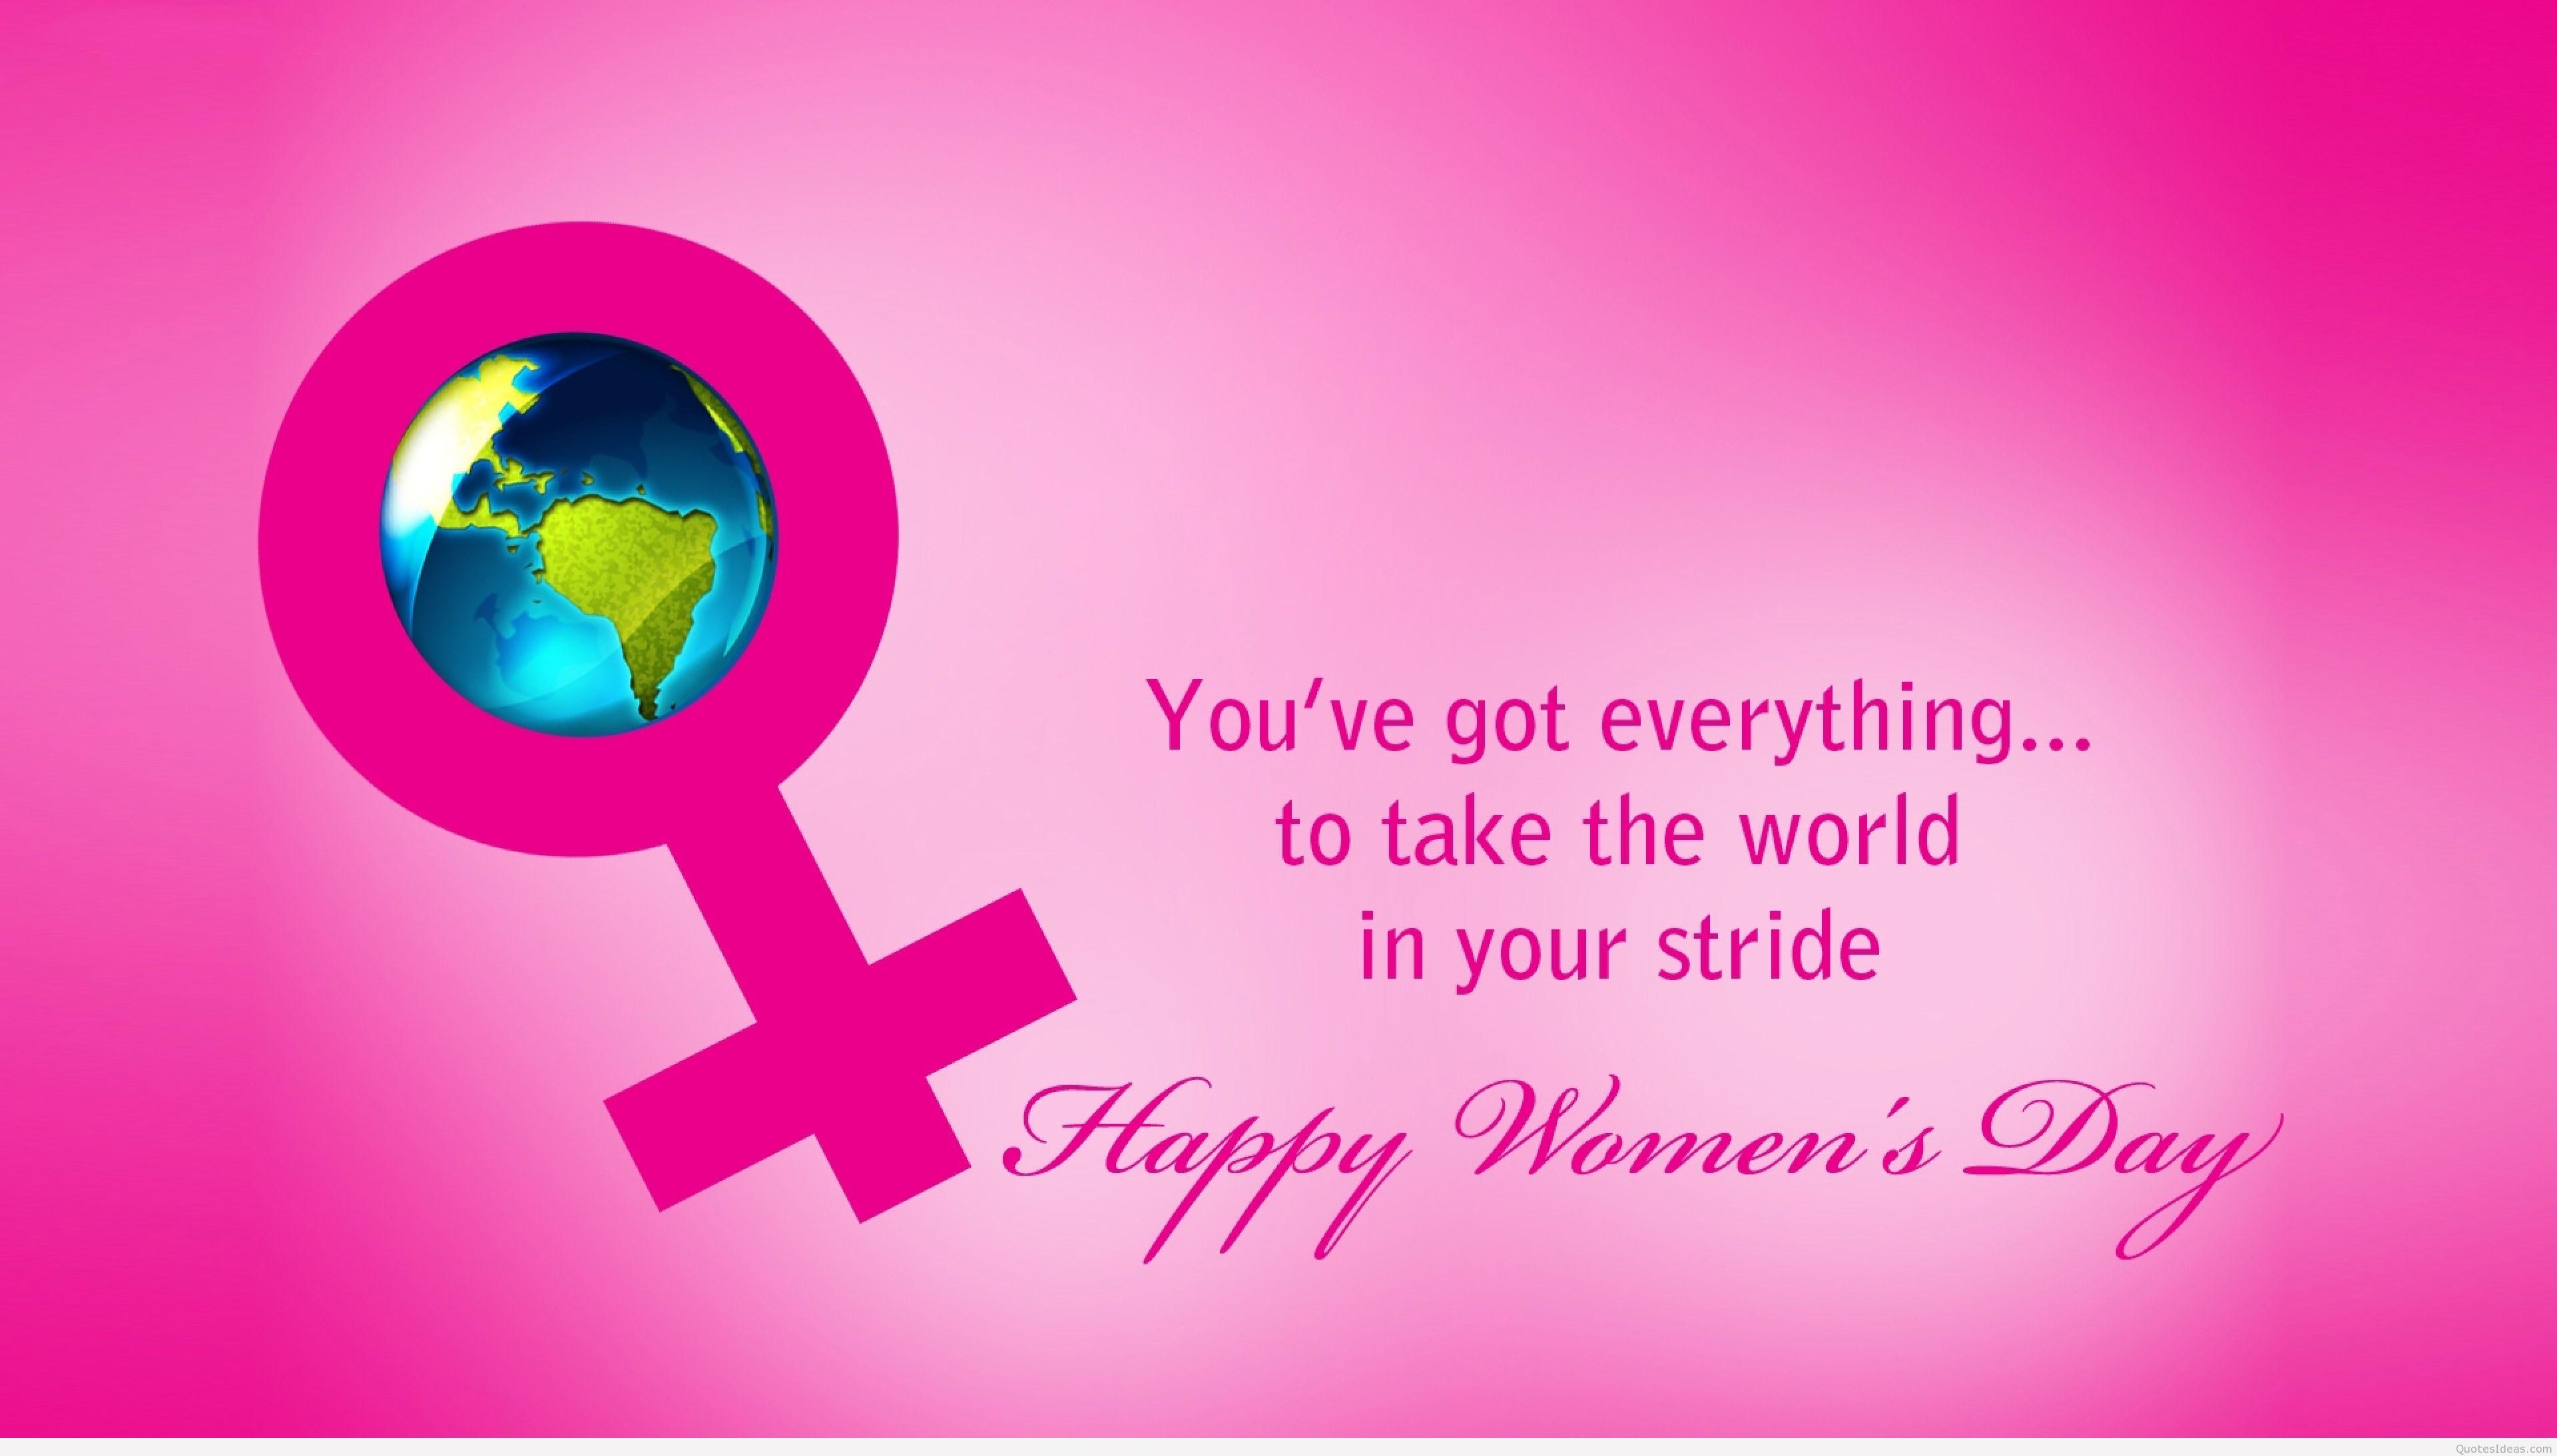 Happy international women's day 8 march wallpaper quotes